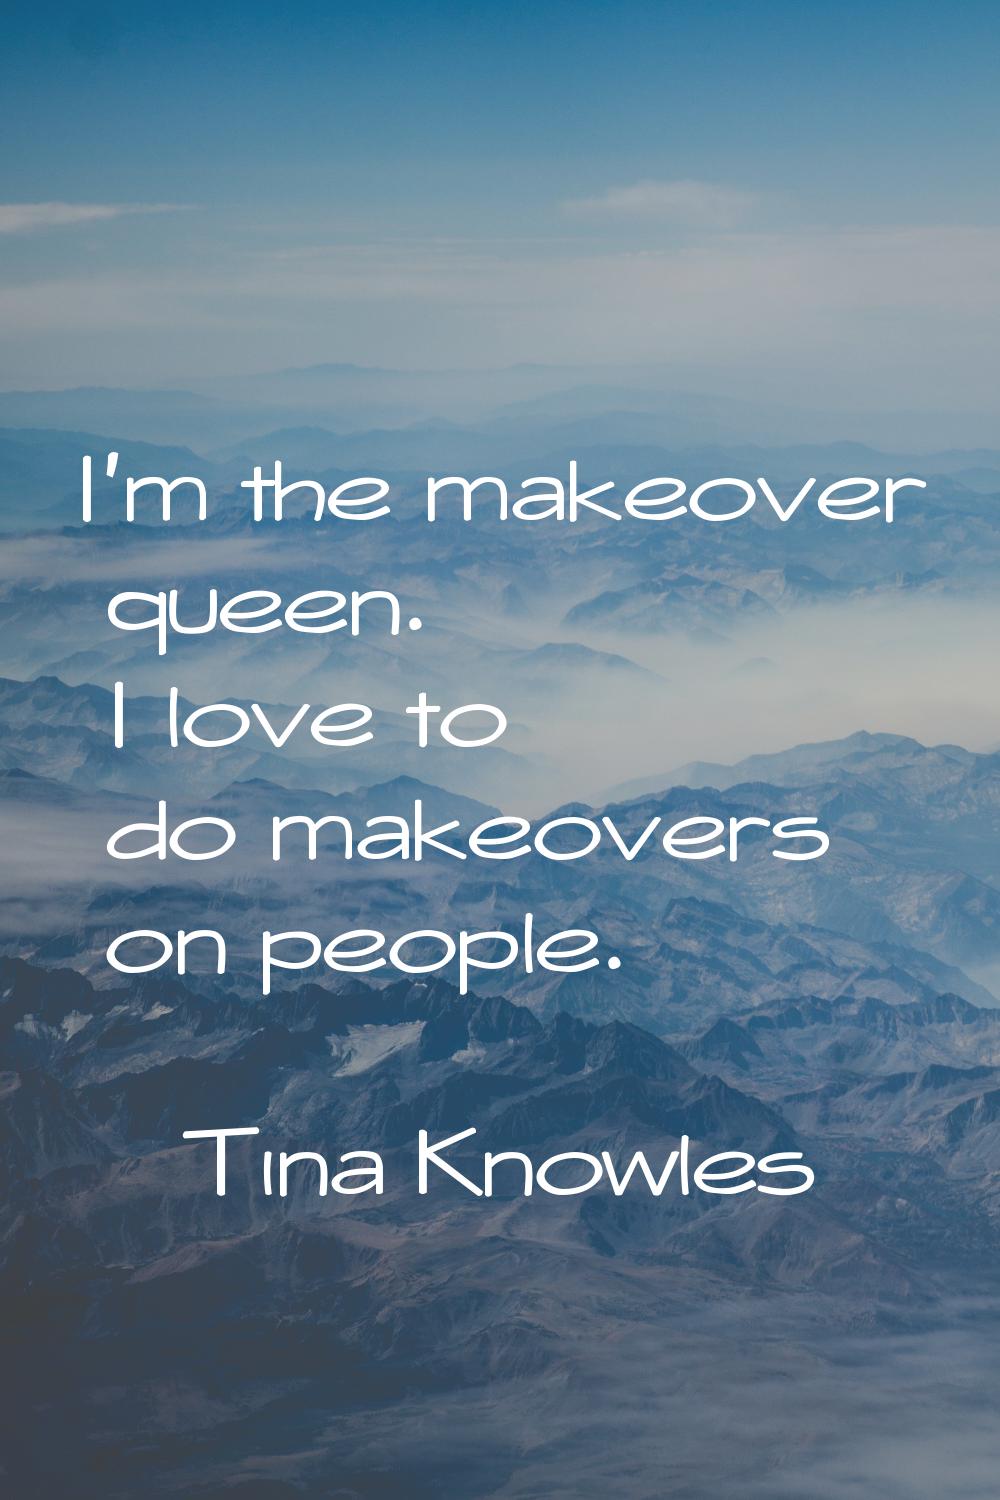 I'm the makeover queen. I love to do makeovers on people.